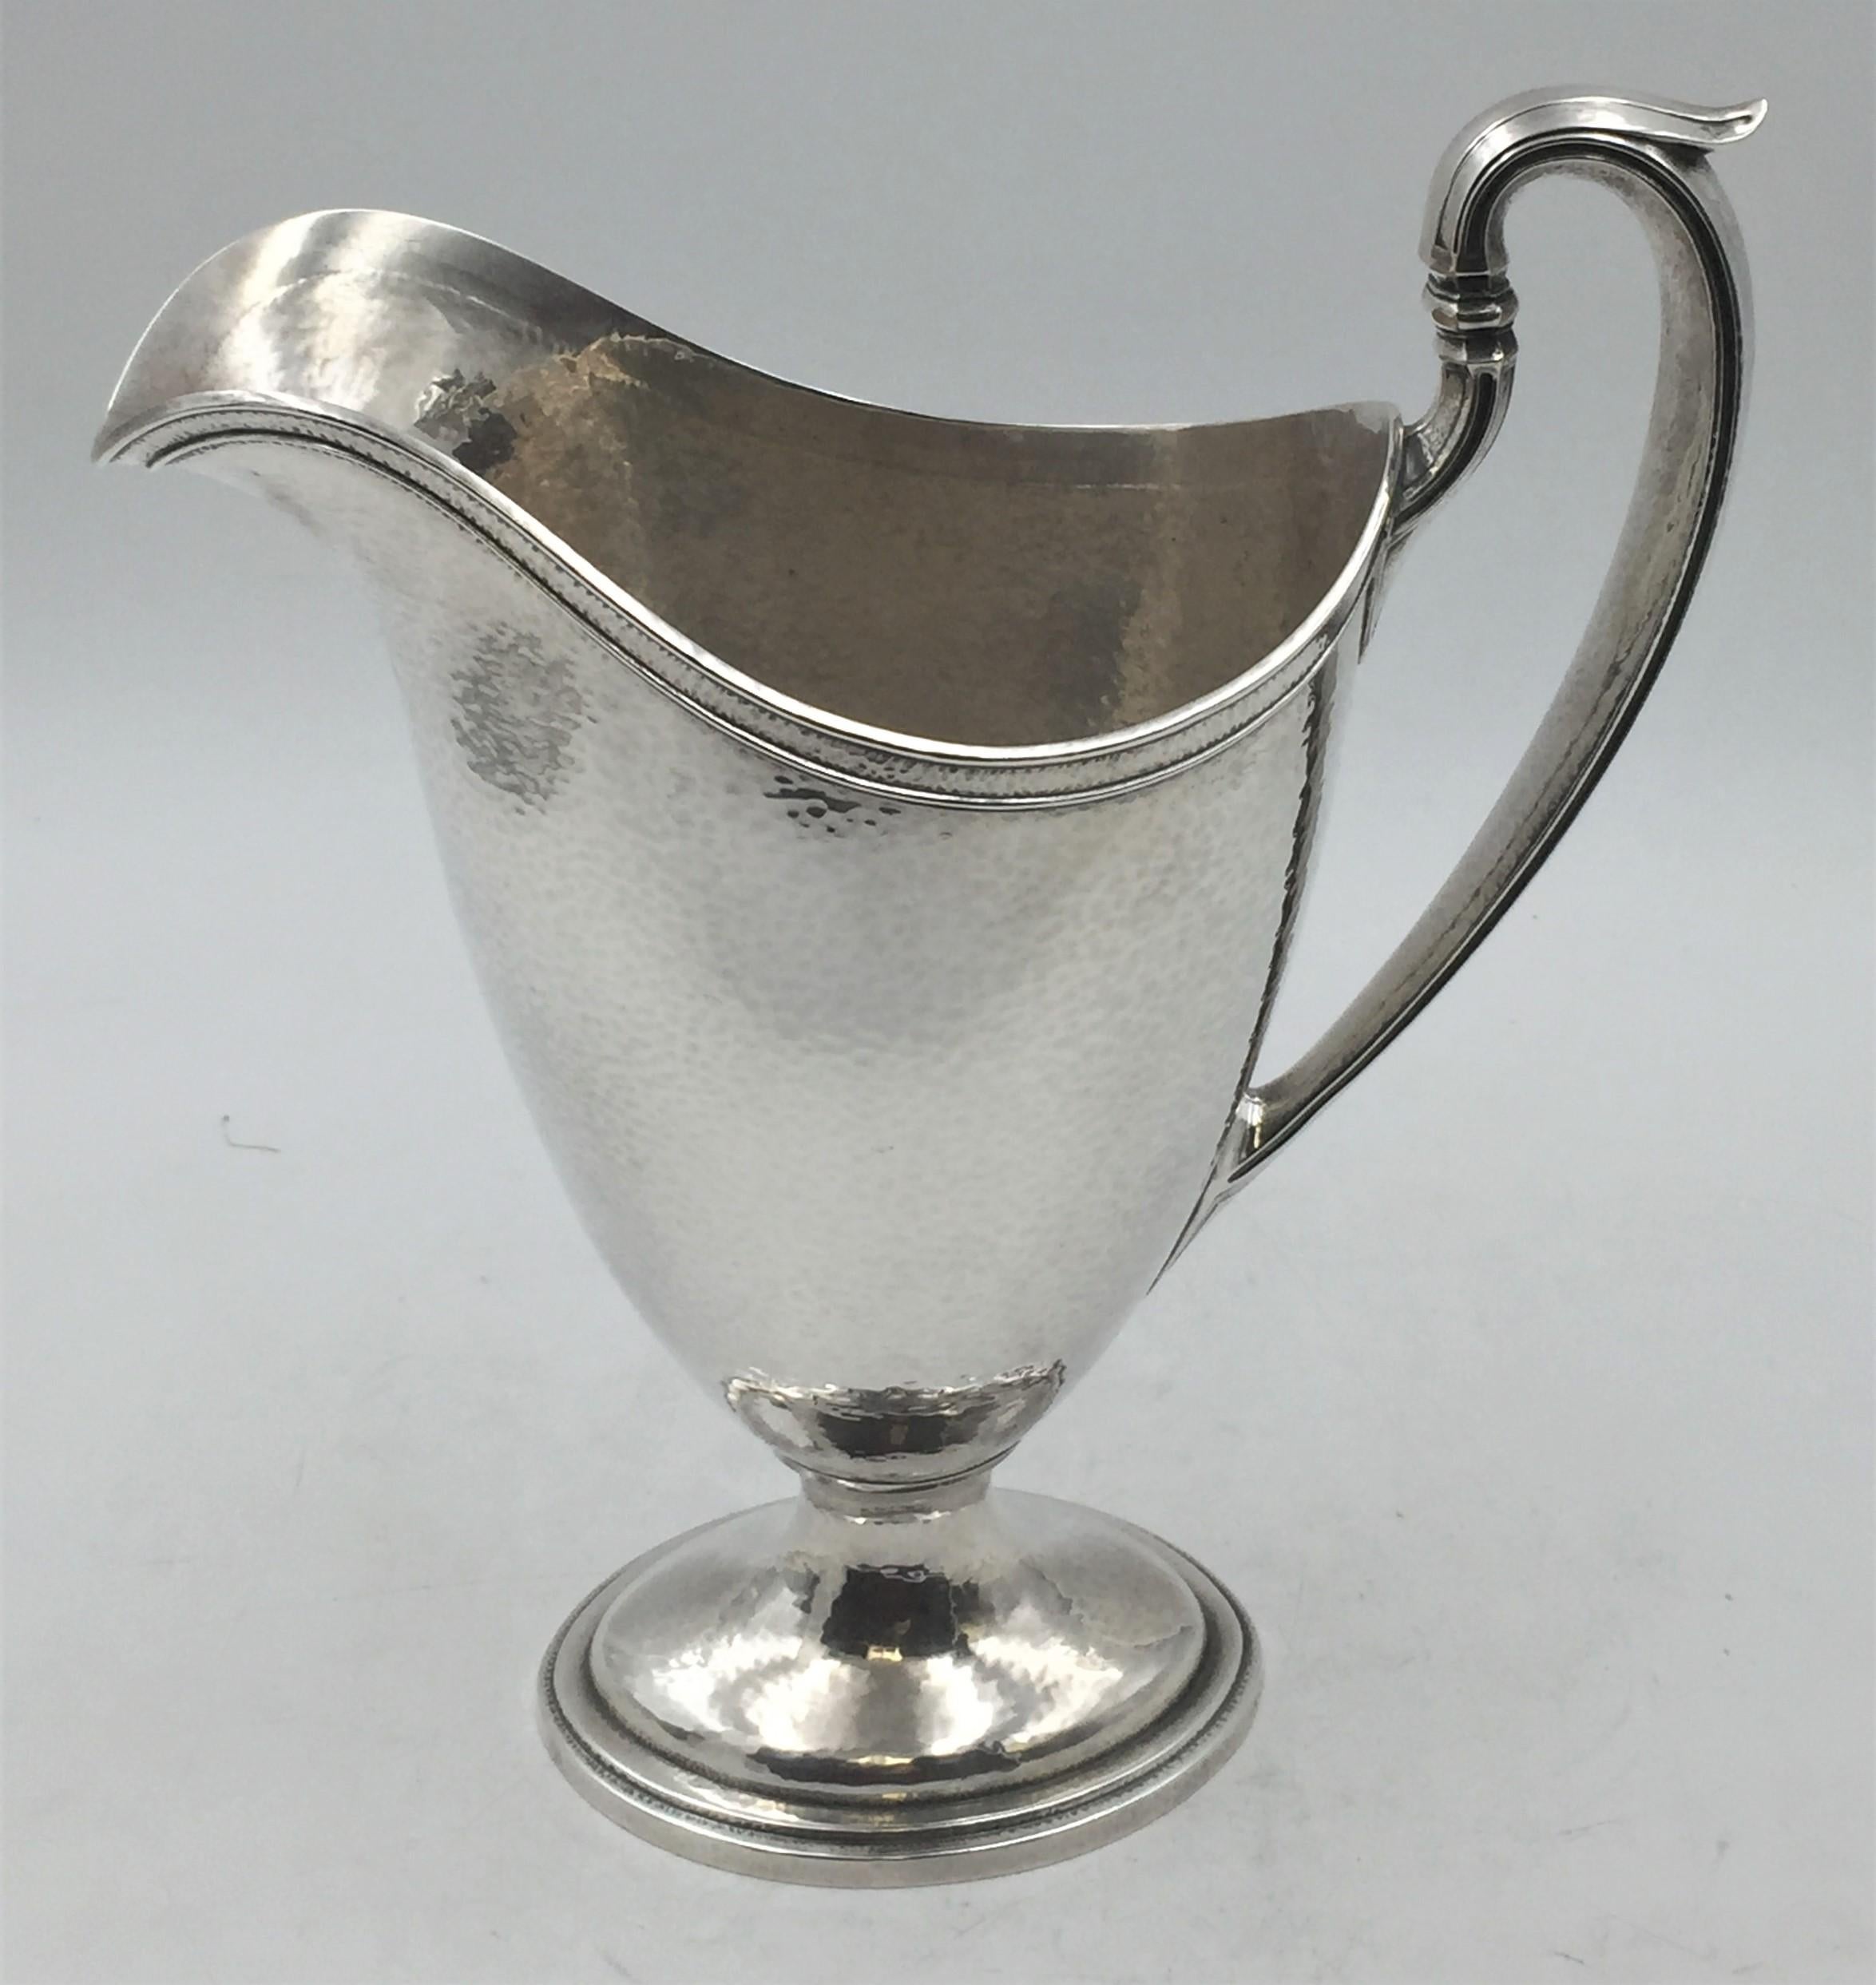 Gorham sterling silver pitcher, beautifully hand hammered, from 1919 in geometrically-inclined, Art Deco style with an applied handle. It measures 11 1/2'' in height by 9 3/4'' from handle to spout by 5'' in width, weighs 26.1 ozt, and bears